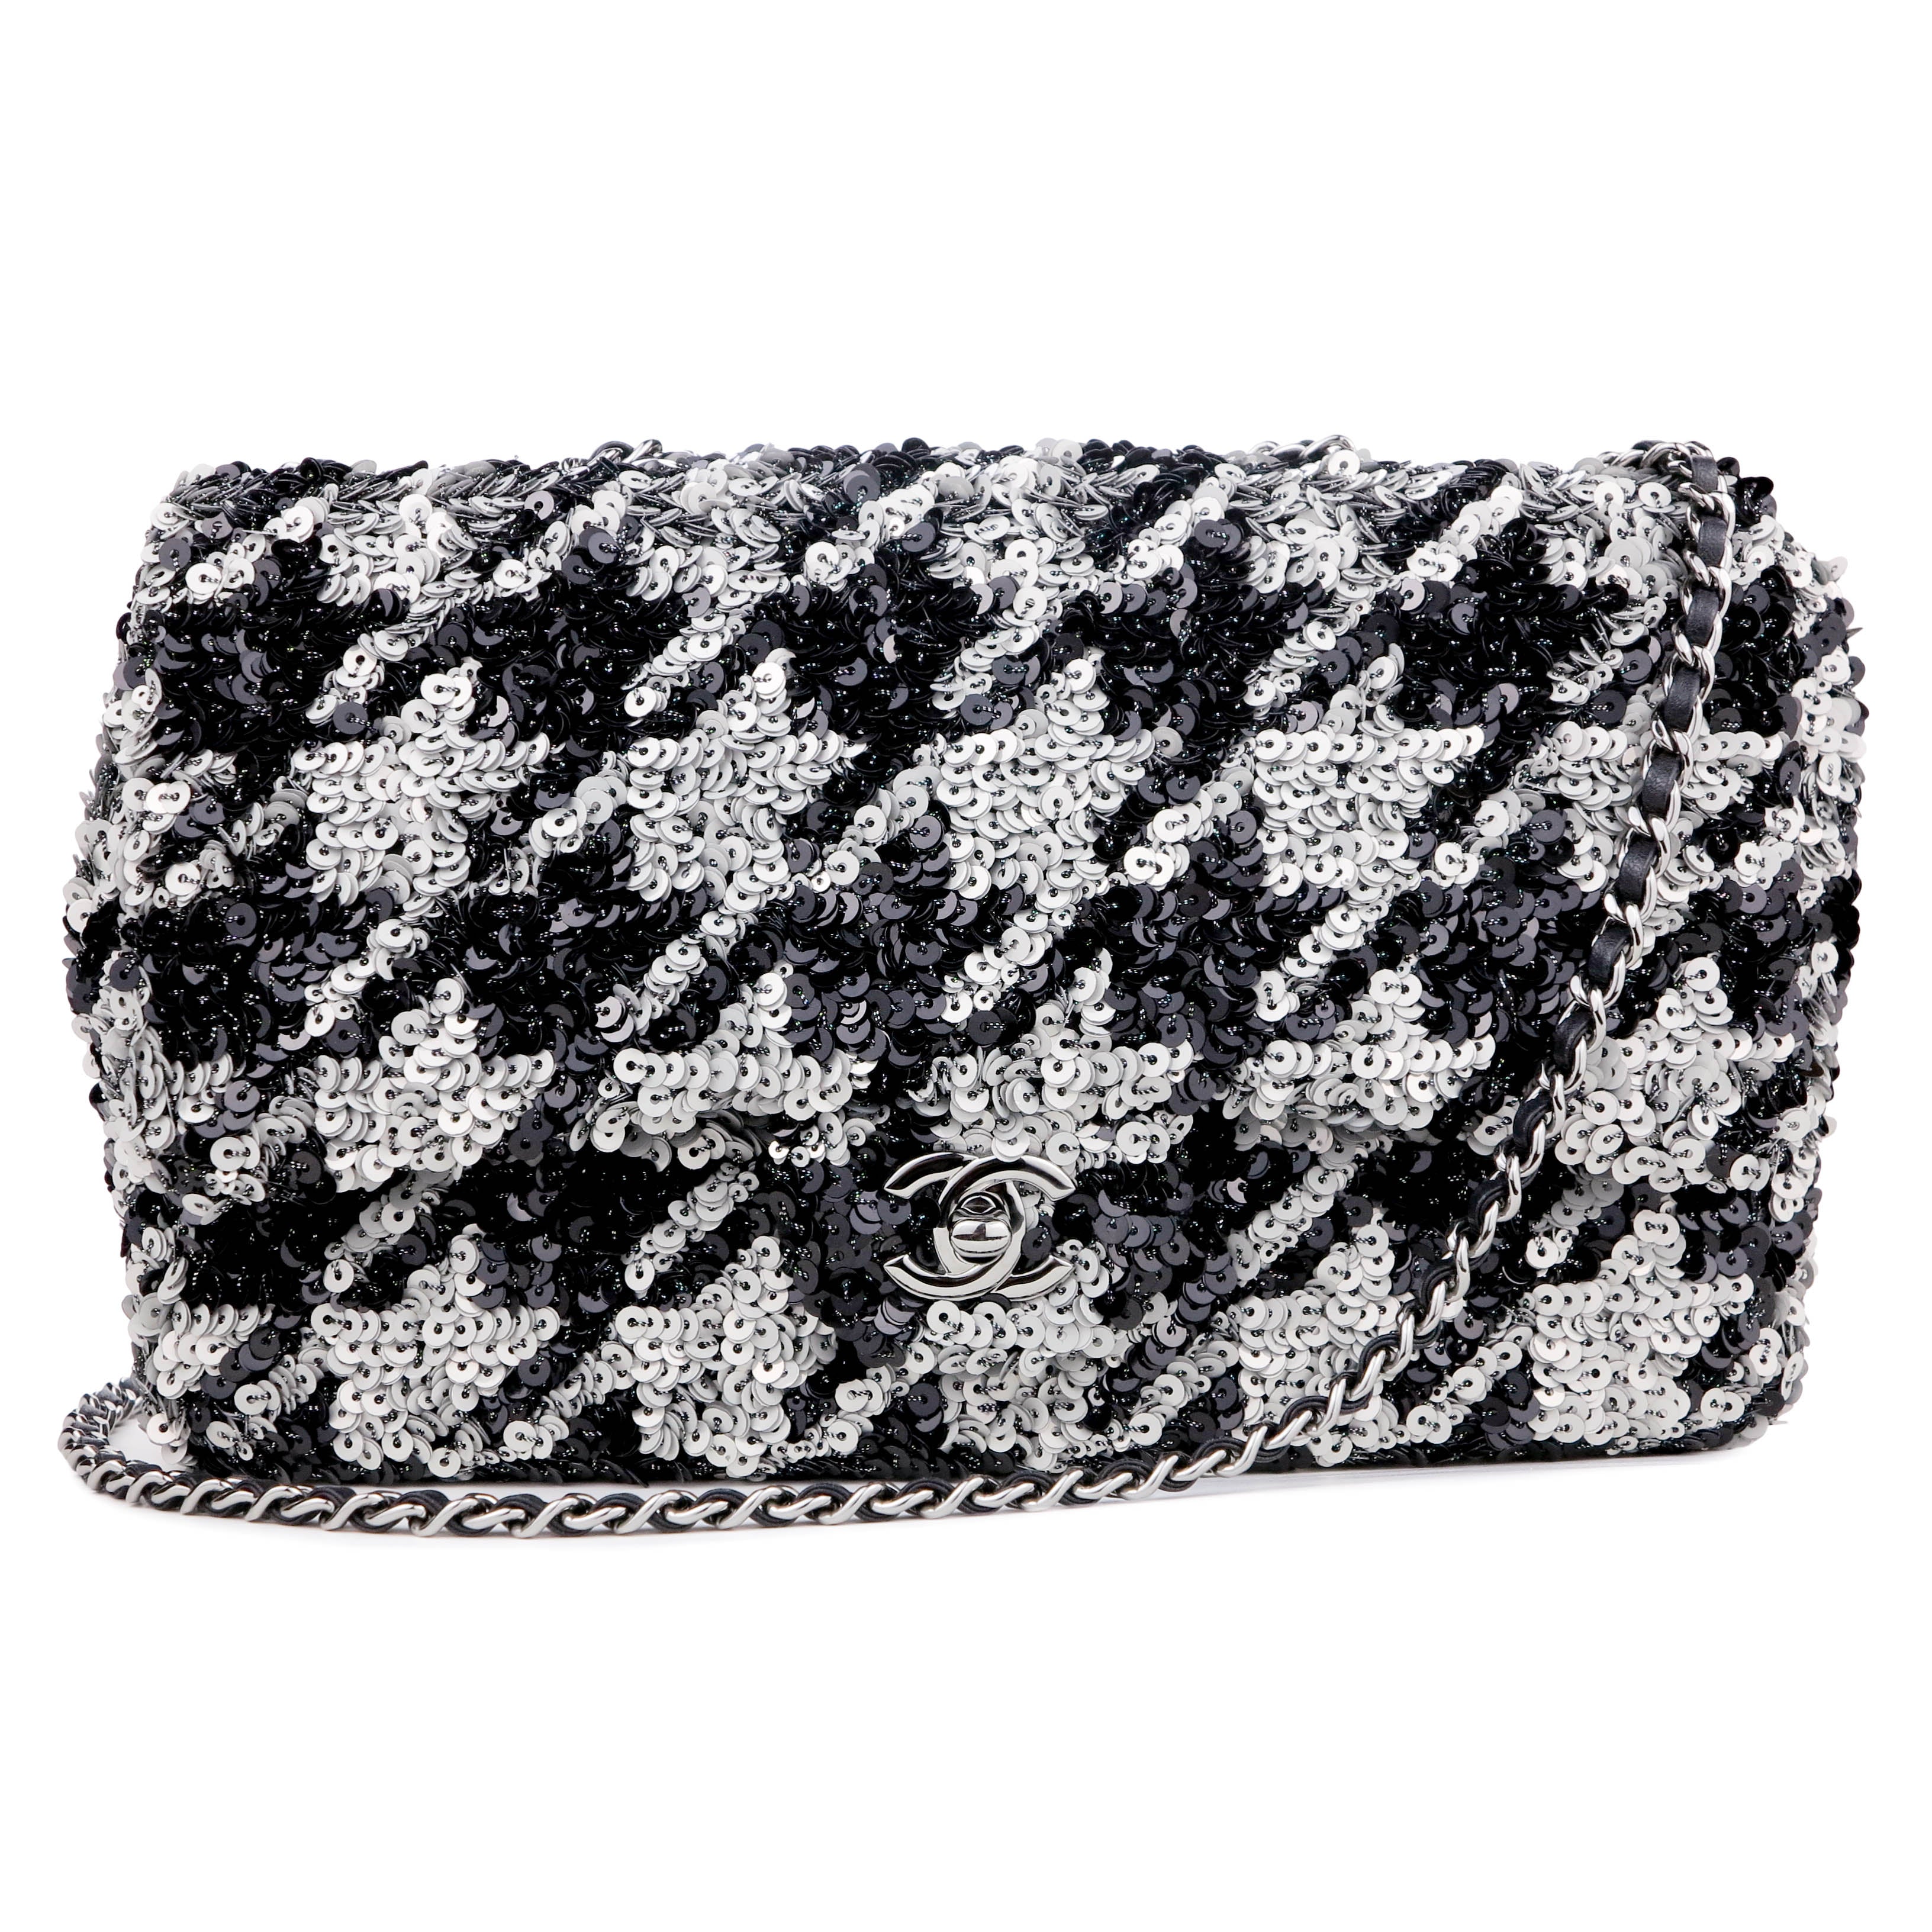 CHANEL Houndstooth Sequin Medium Flap Bag in Silver and Black